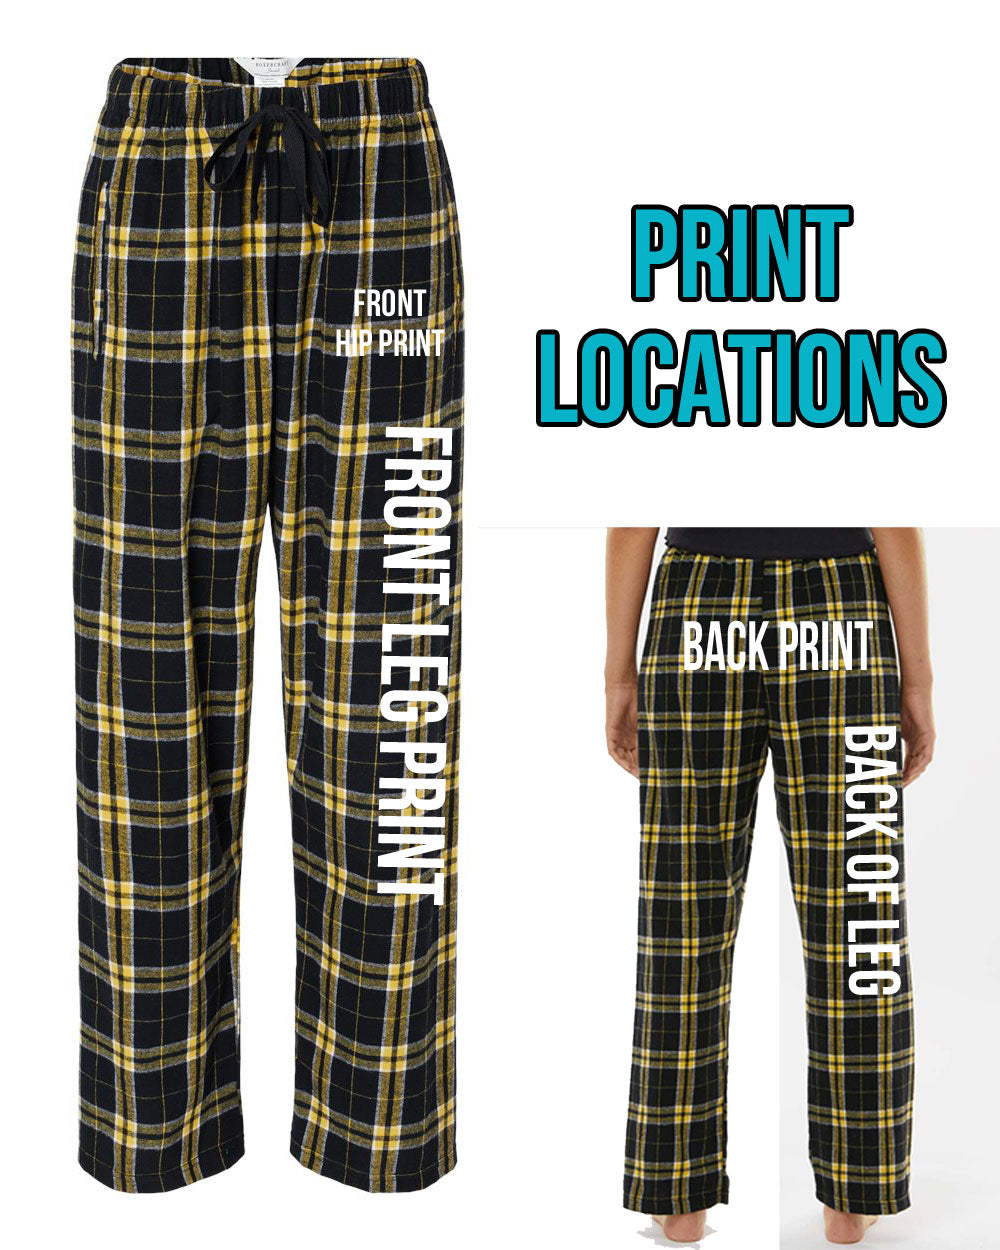 Boxercraft Unisex Flannel Pants Black and Gold Color Pants with Custom Text